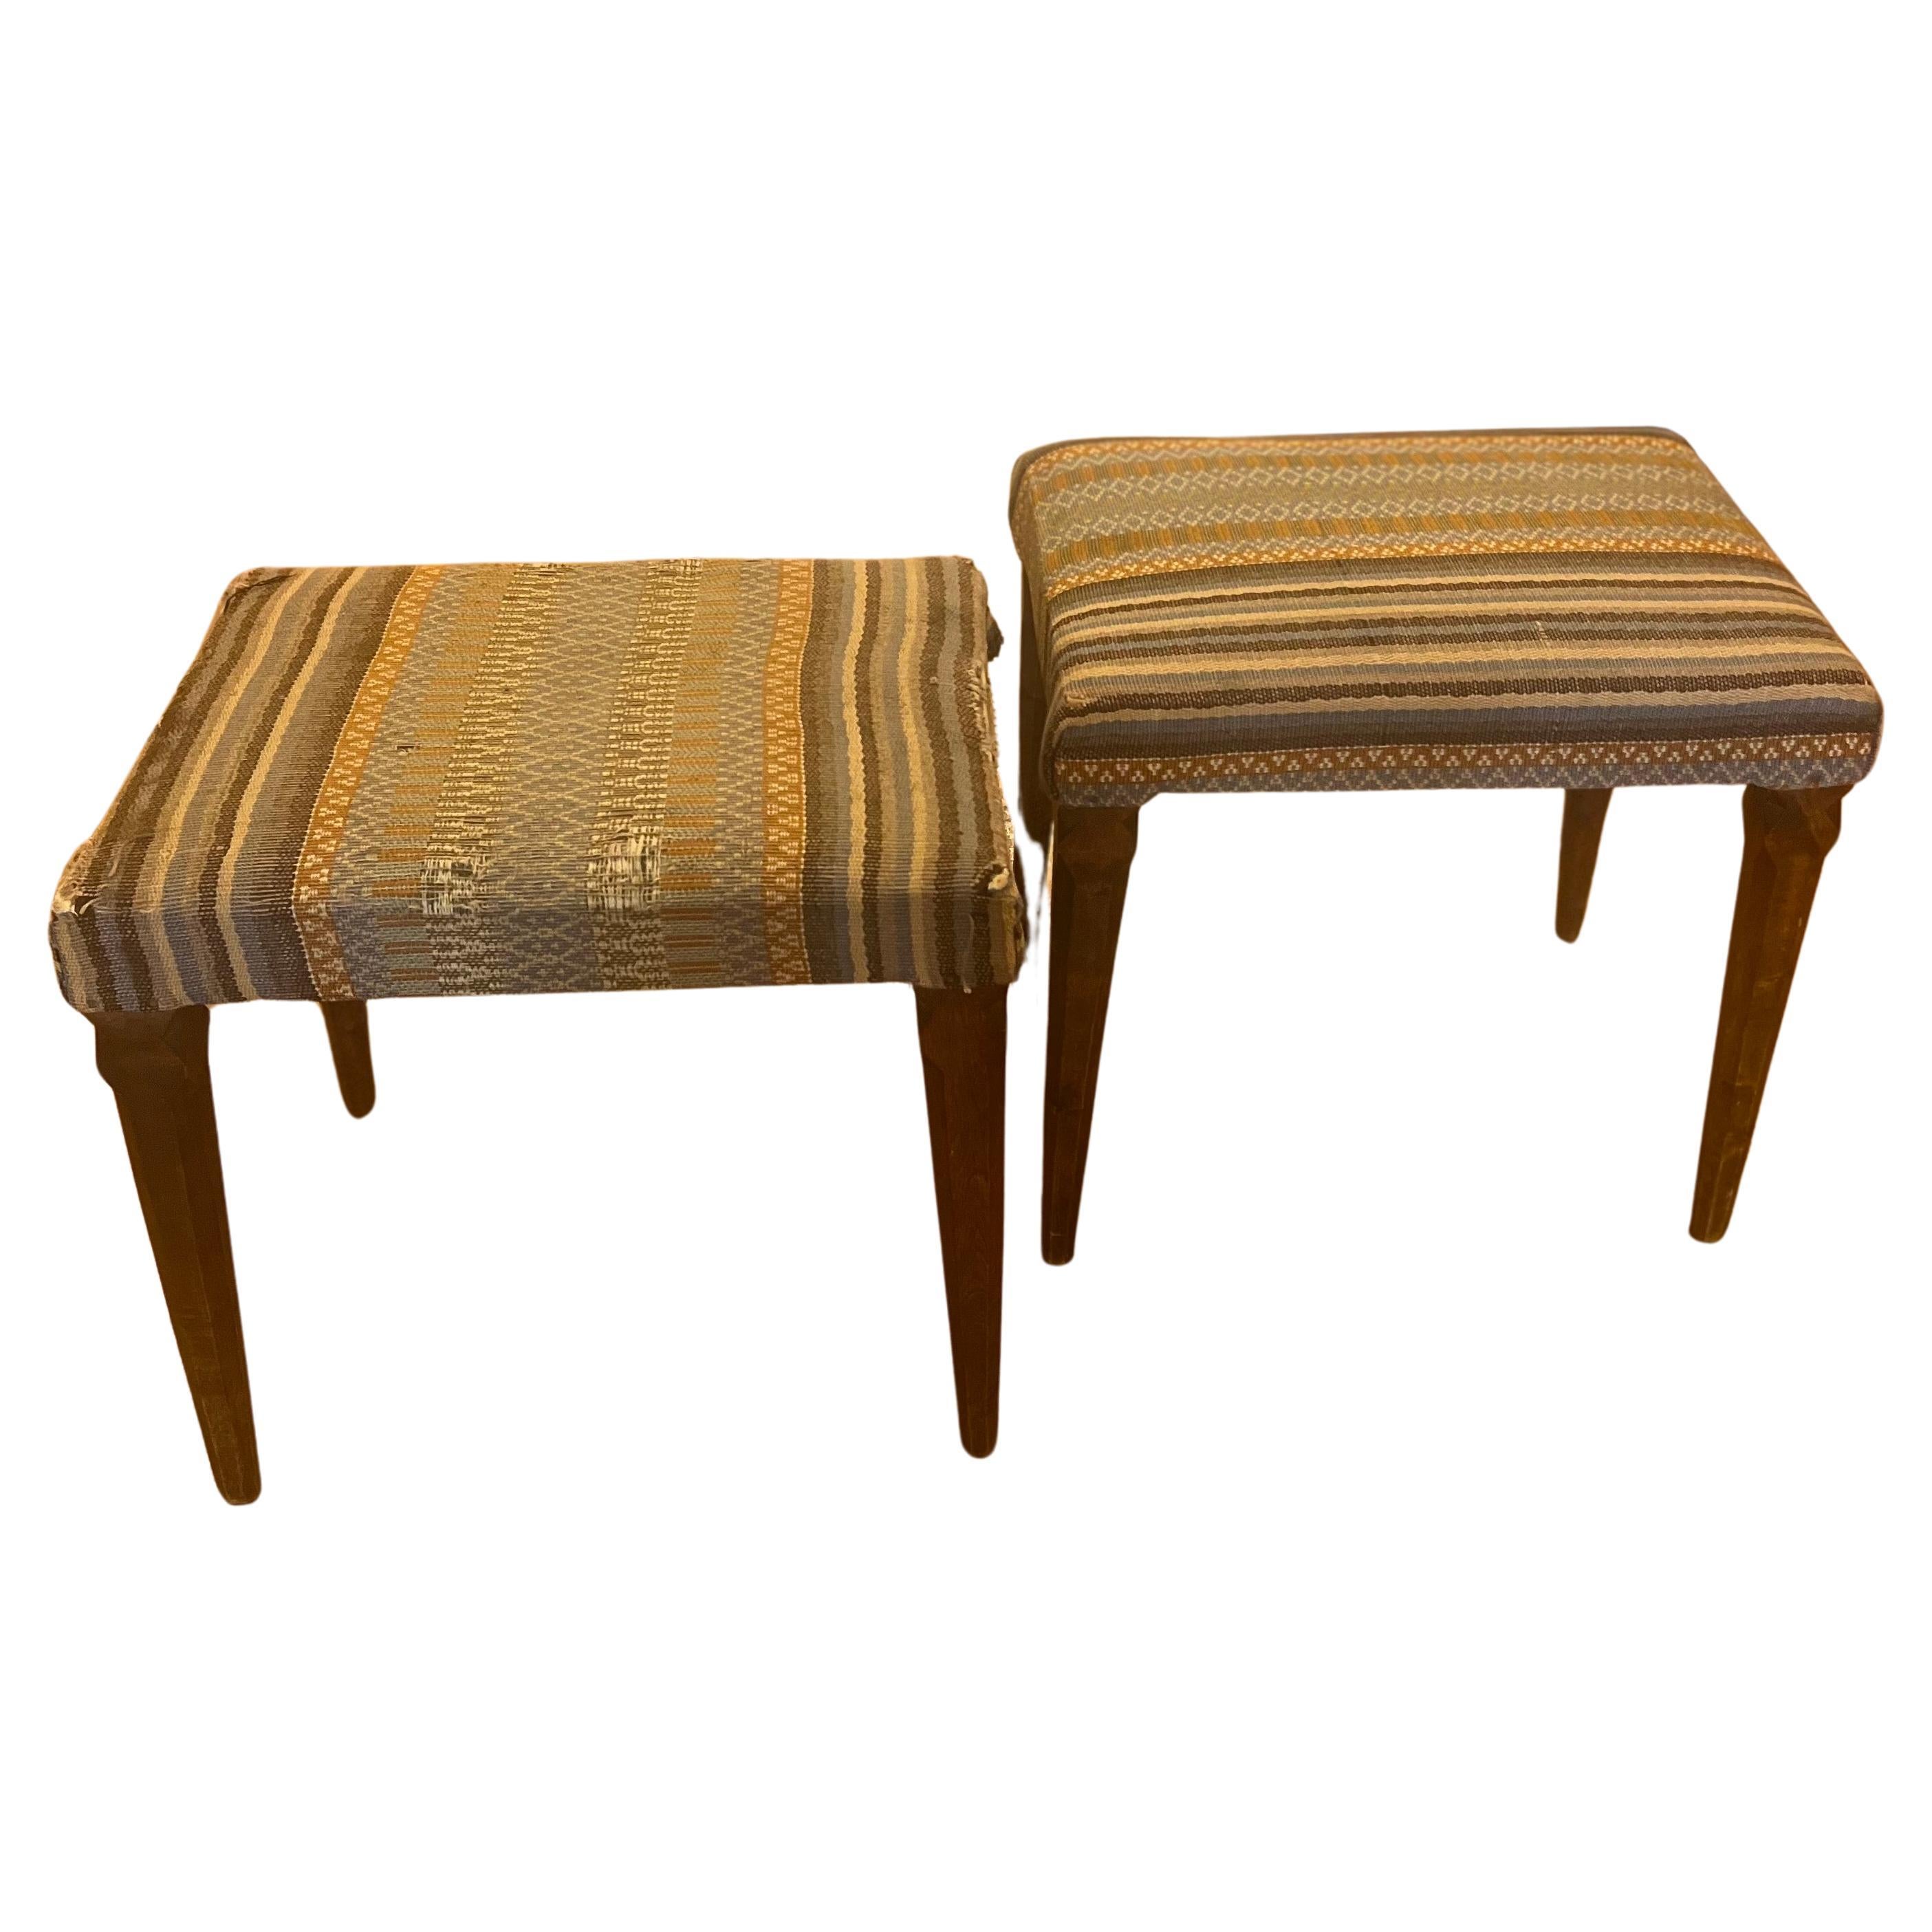 Pair of Rustic Swedish Modern Stools Wood Carved Legs For Sale